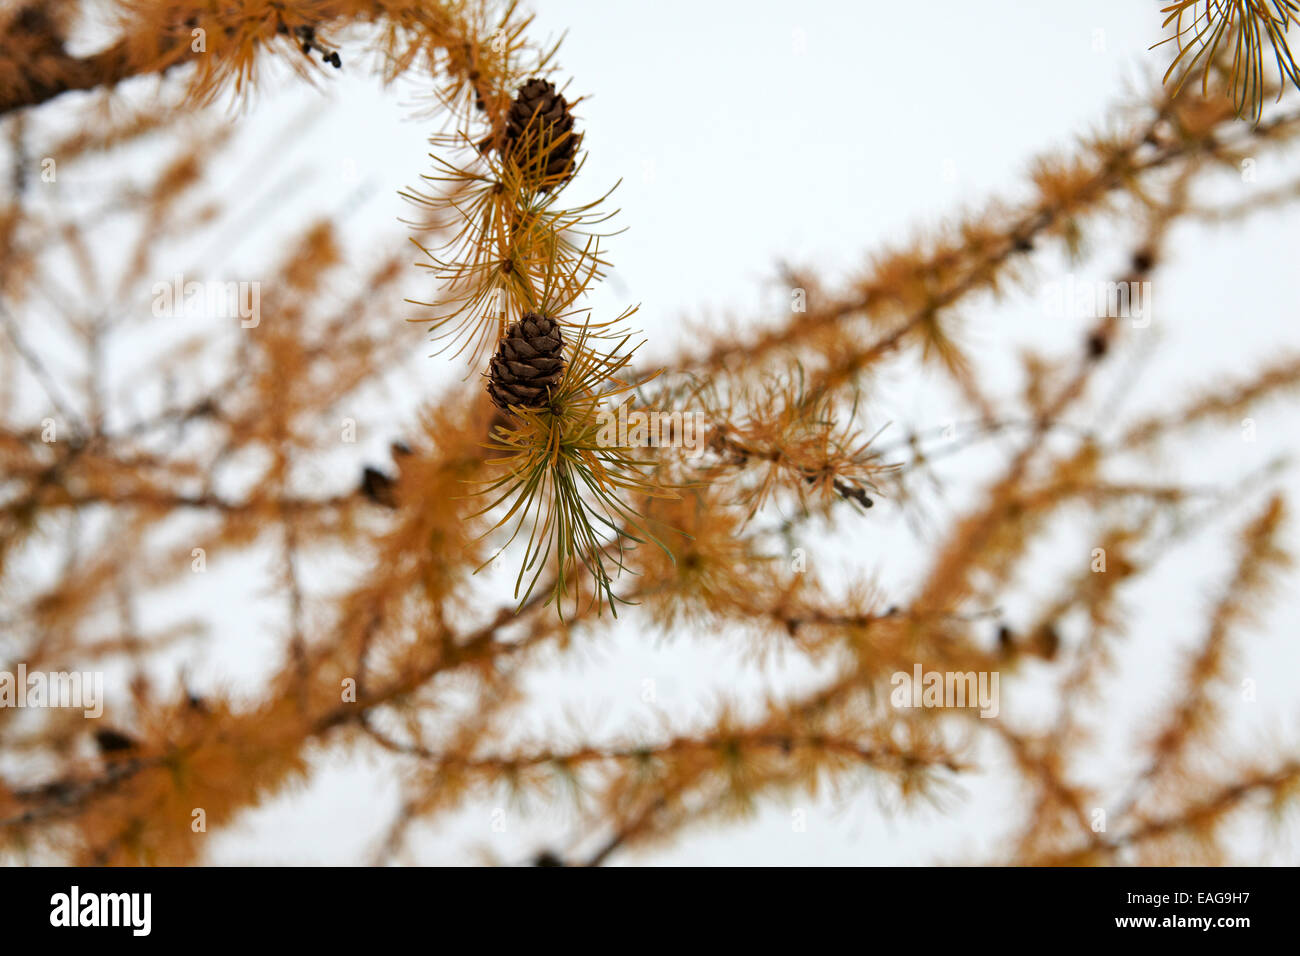 Tamarack Larch tree with cones, needles have changed to gold color for Autumn, first snow has fallen. Stock Photo